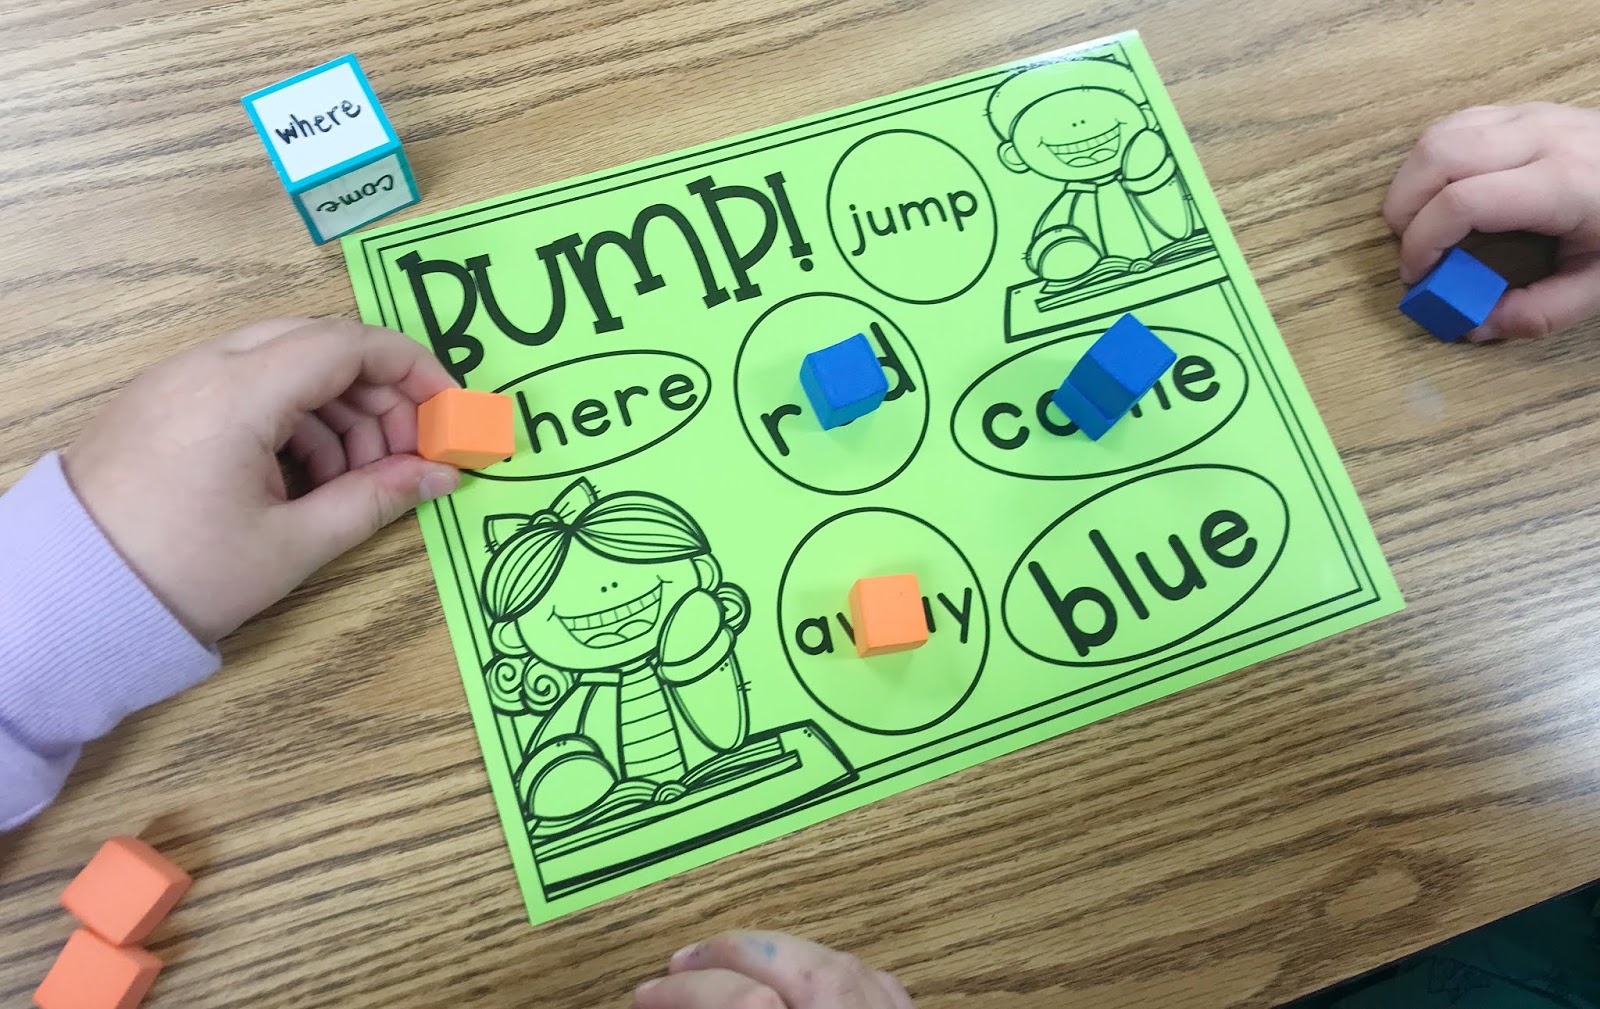 Teaching primary grades or special education means sight words should be part of your daily review. Students required repeated exposure to allow mastery of recognition. Whether you utilize these 6 fun ways as a whole class, centers, or small groups, they are sure to create a more exciting way of practice for your kids. This blog post shows a few quick, simple games and ideas to to help reinforce your students recognition of sight words. {lower elementary, special education, centers}